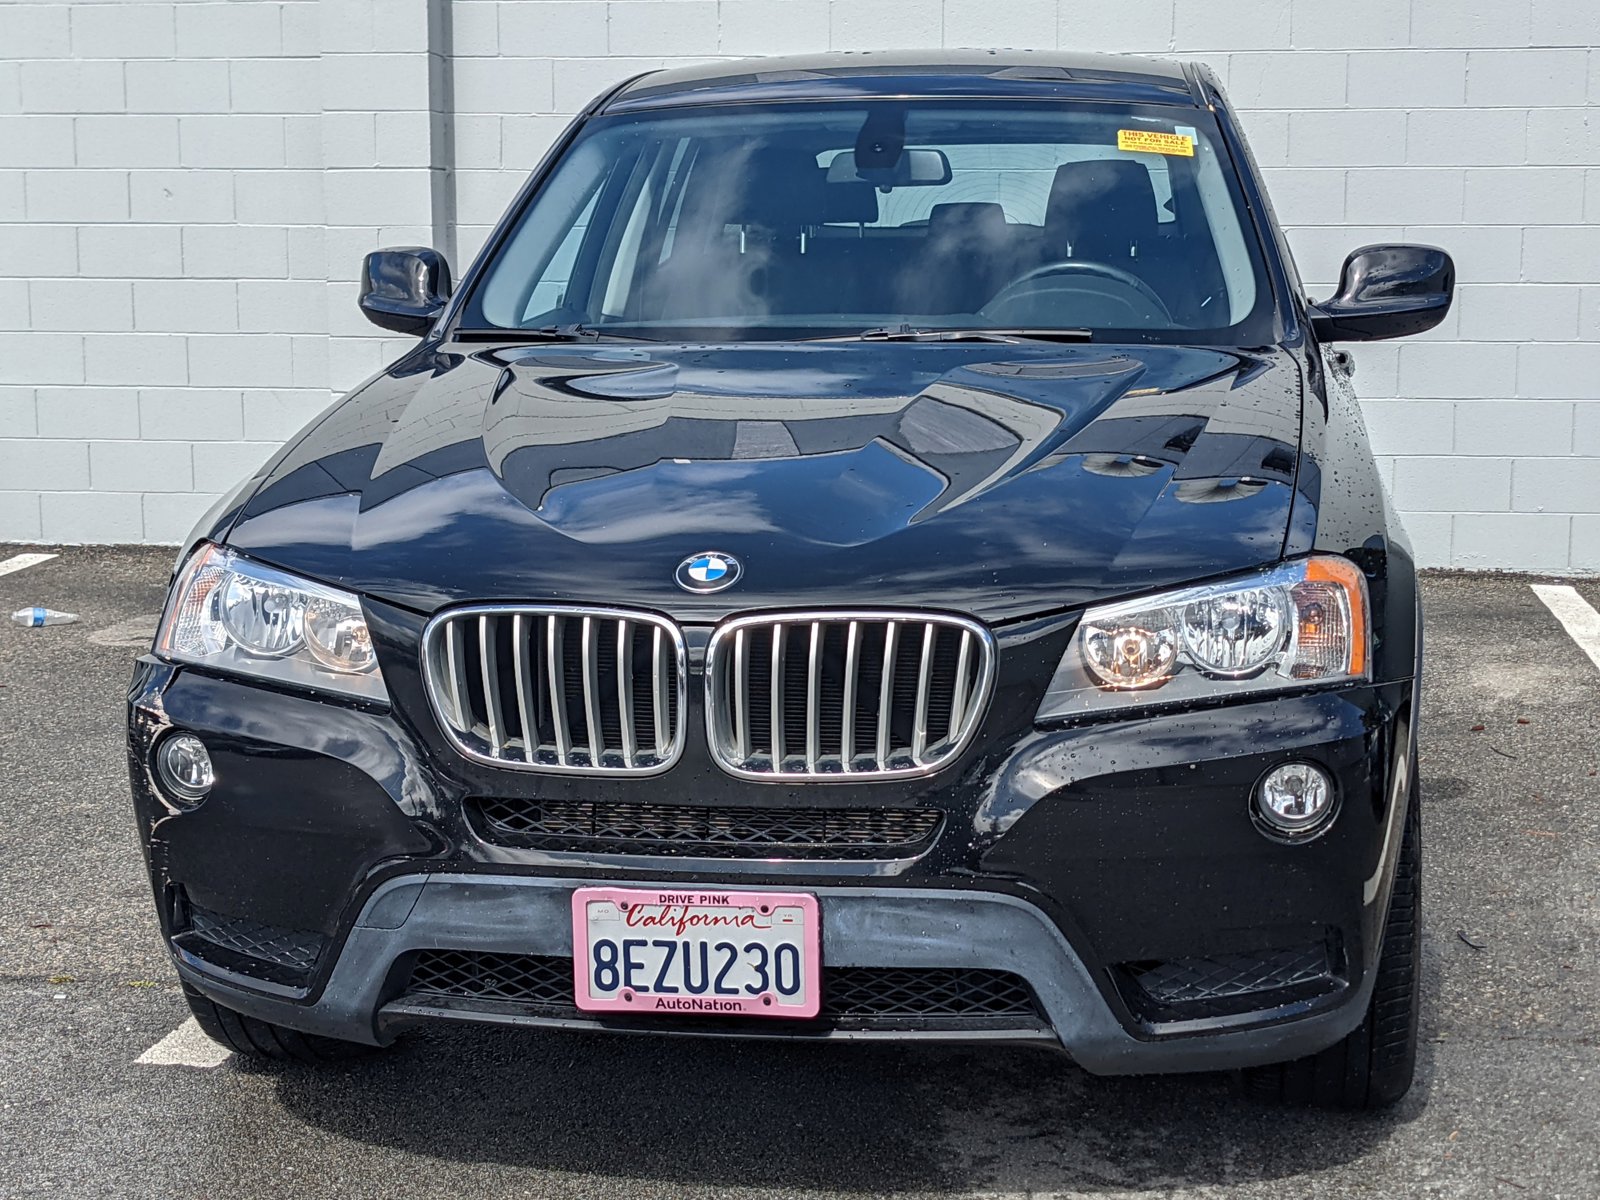 Used 2012 BMW X3 xDrive28i with VIN 5UXWX5C55CL720437 for sale in Fremont, CA